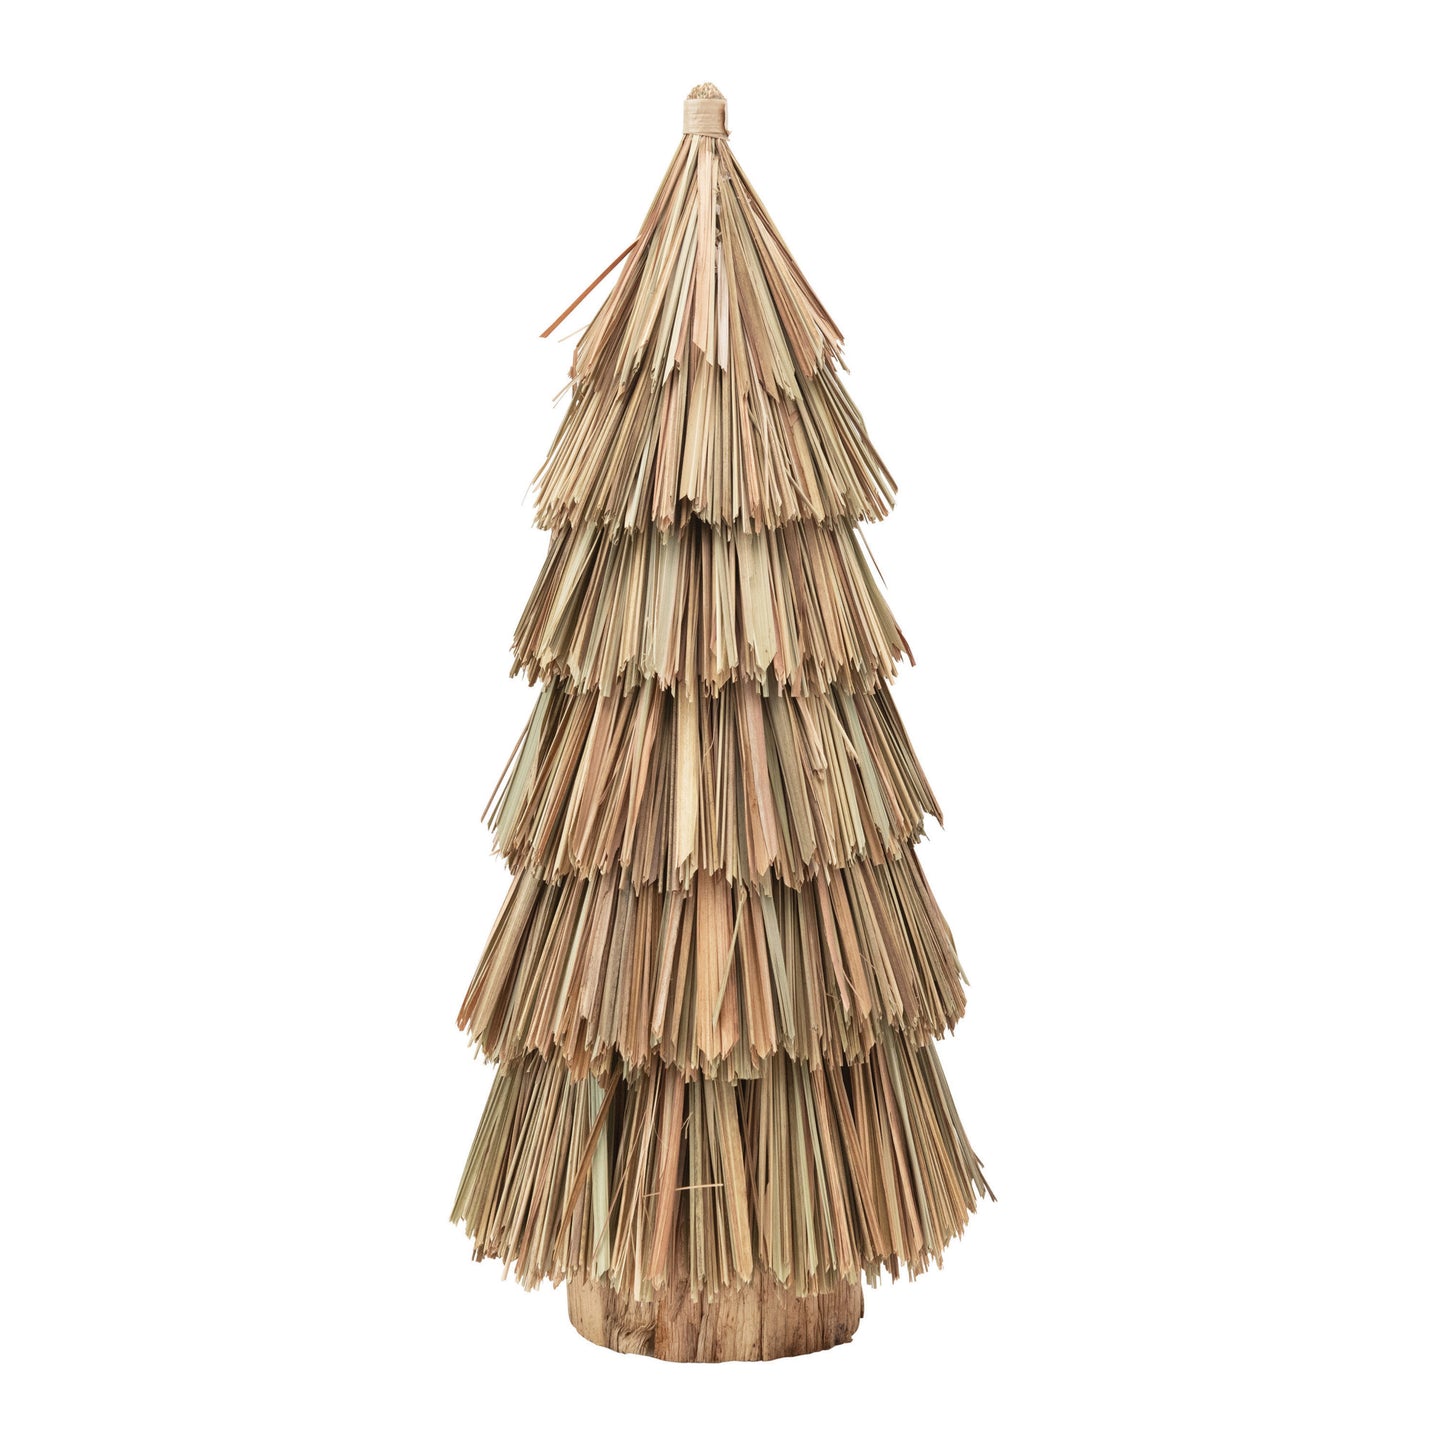 9-1/2" Round x 23"H Natural Hand-Woven Grass Tree